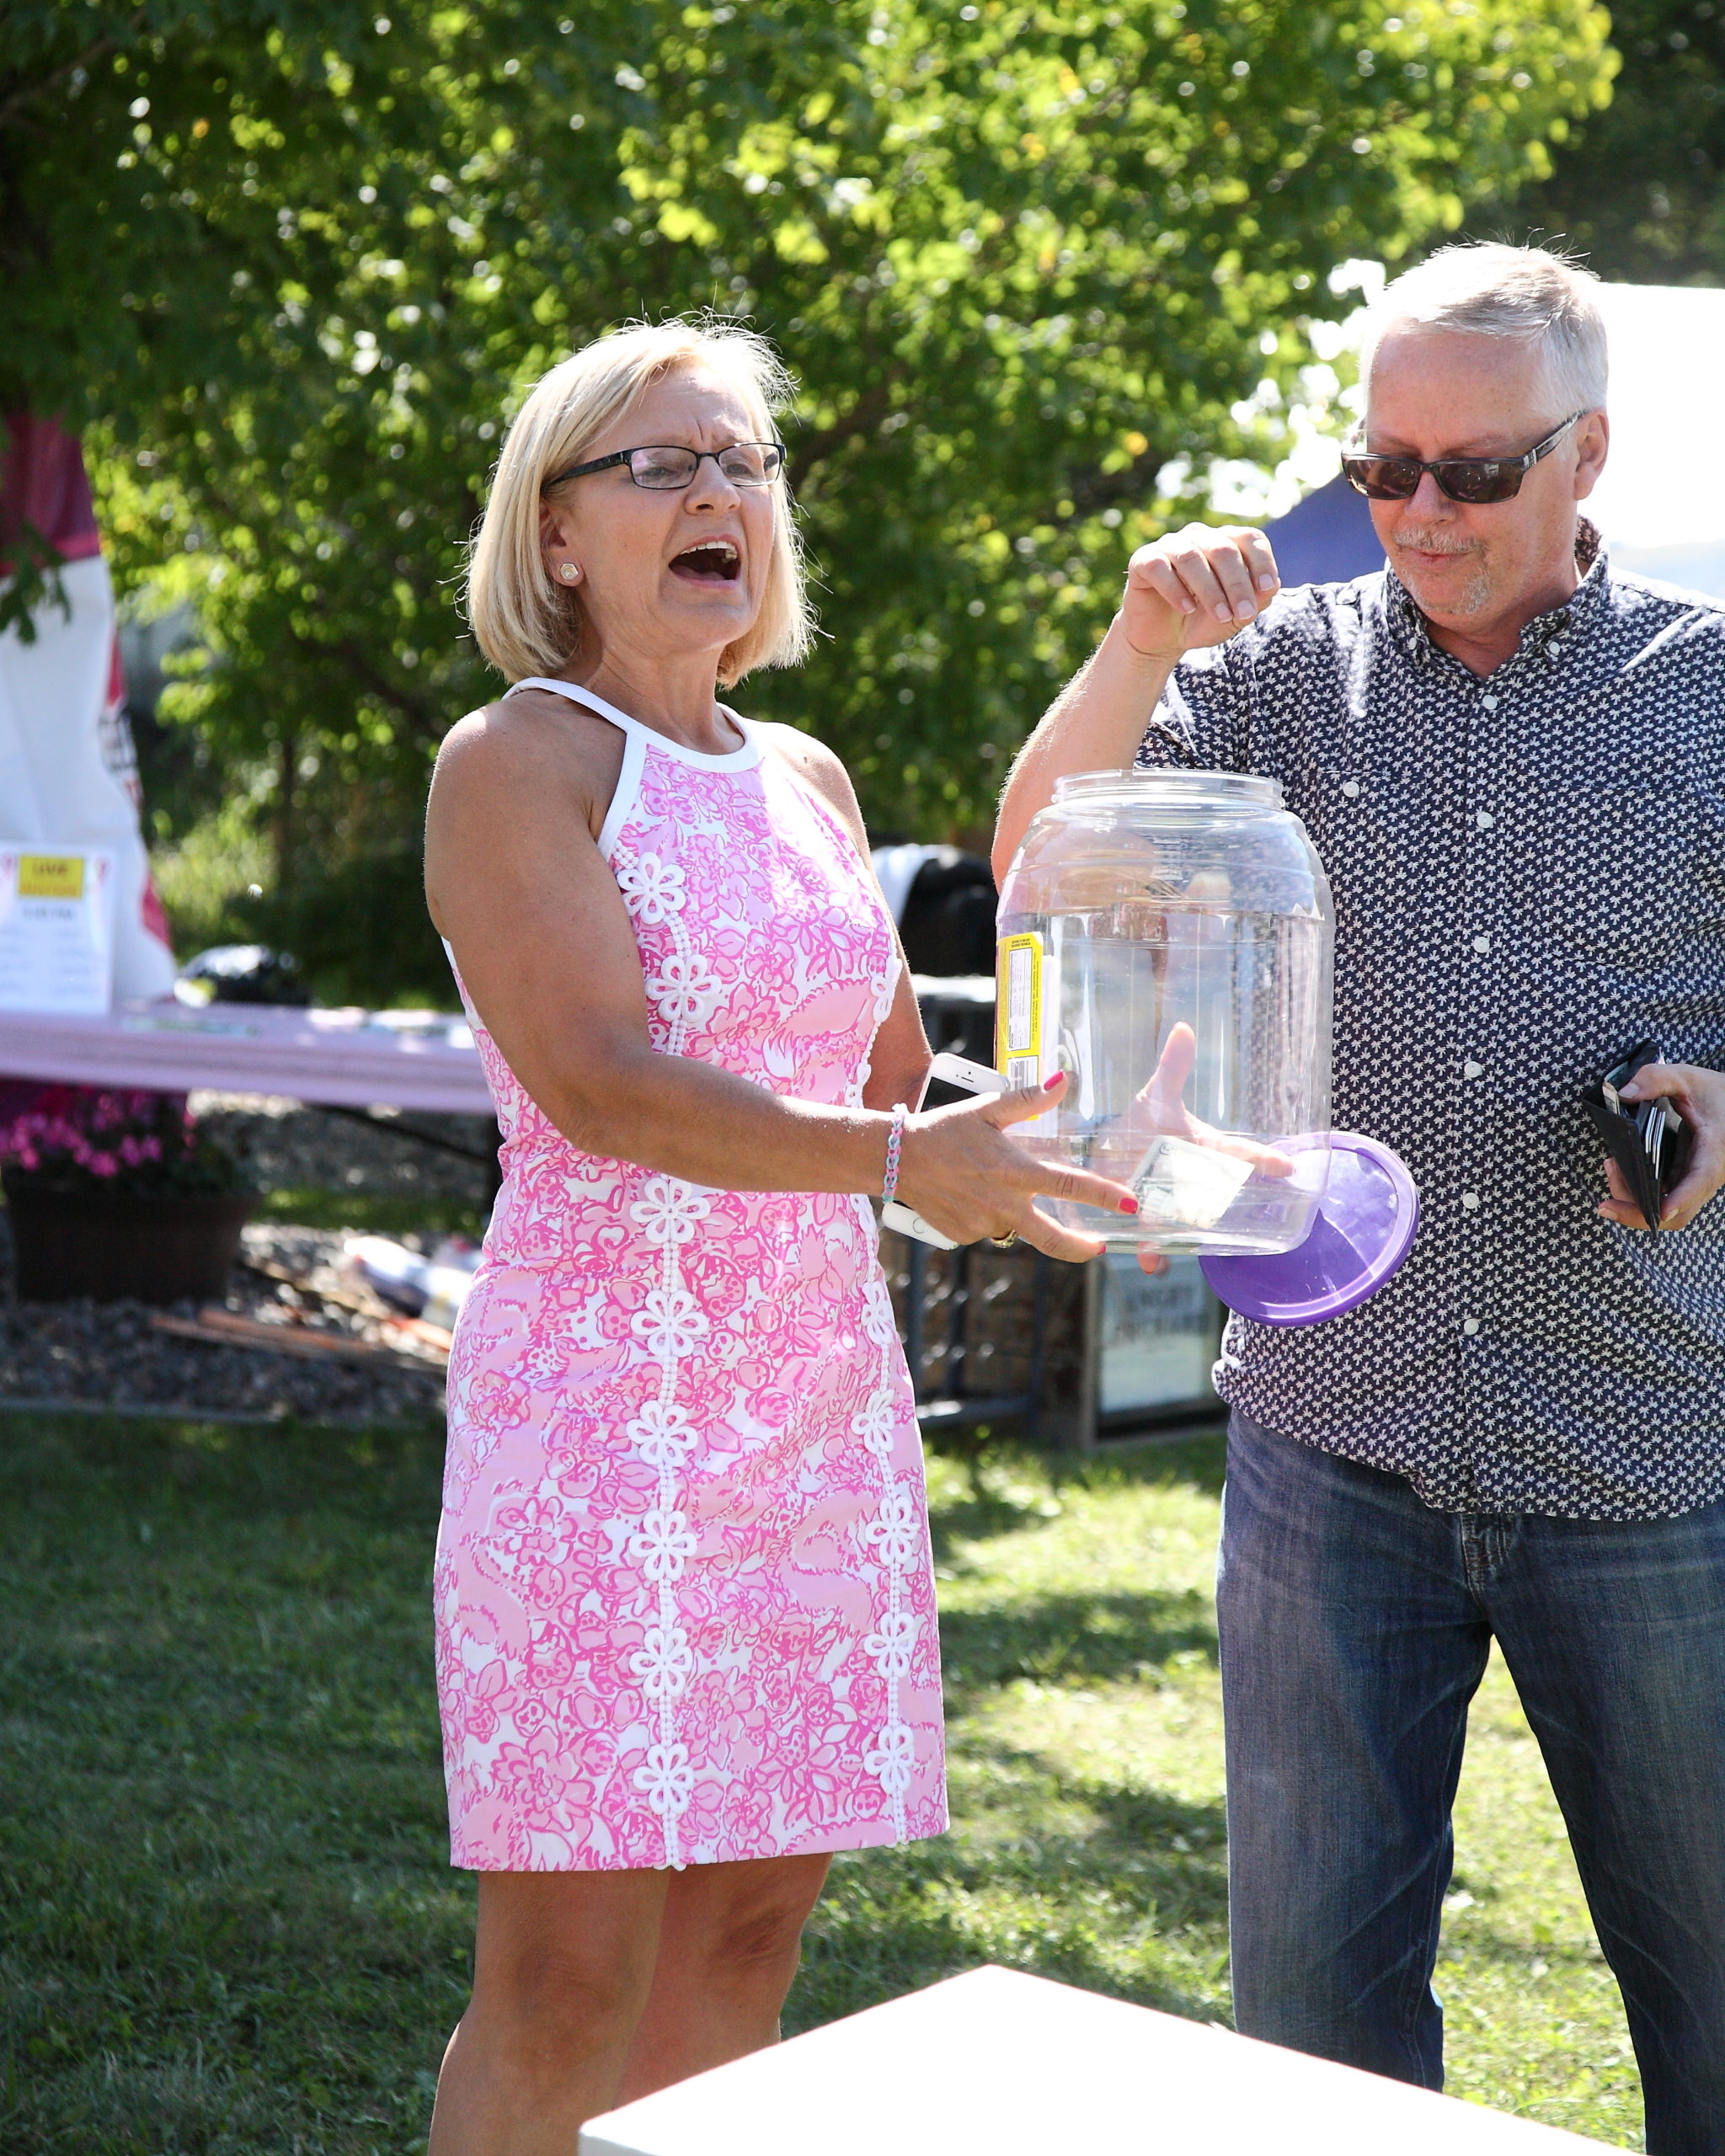 Judy holding a jar full of money with Peter dropping money in